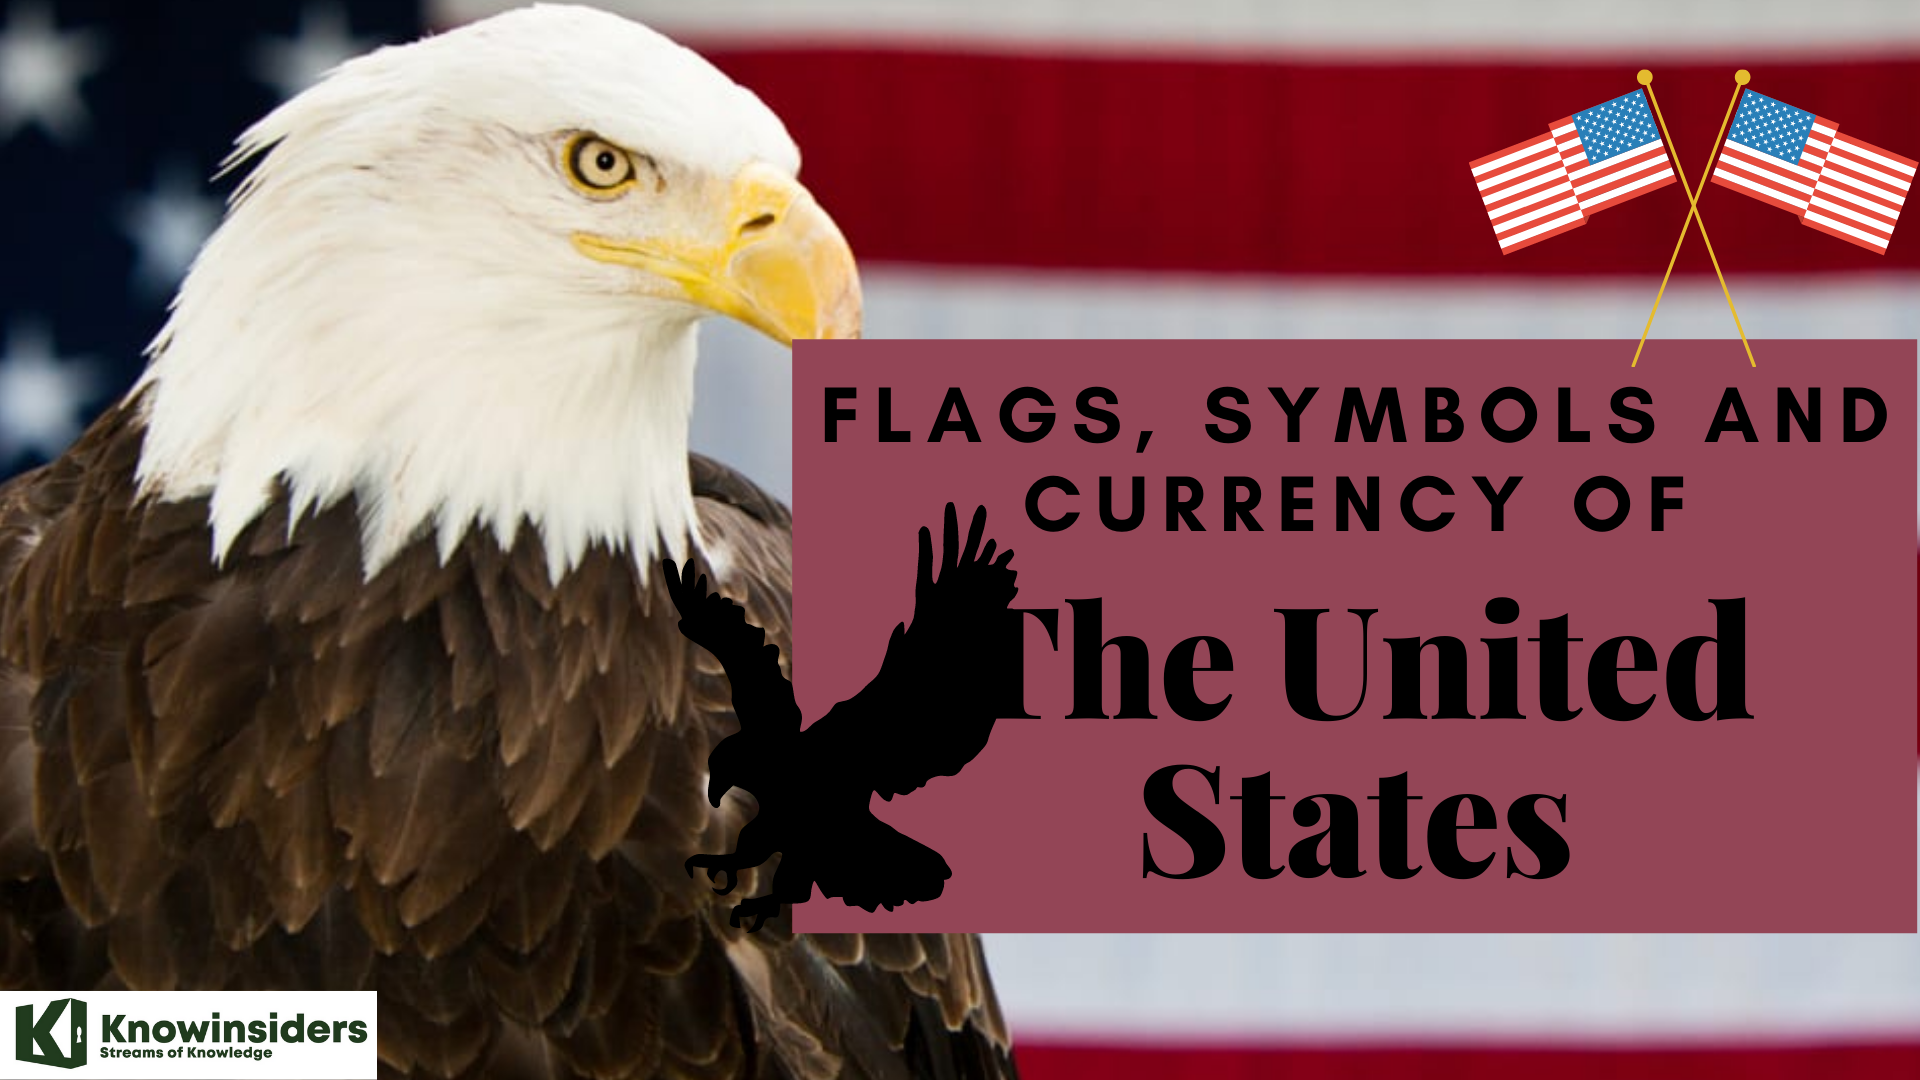 What are the Flags, Symbols & Currency of the United States